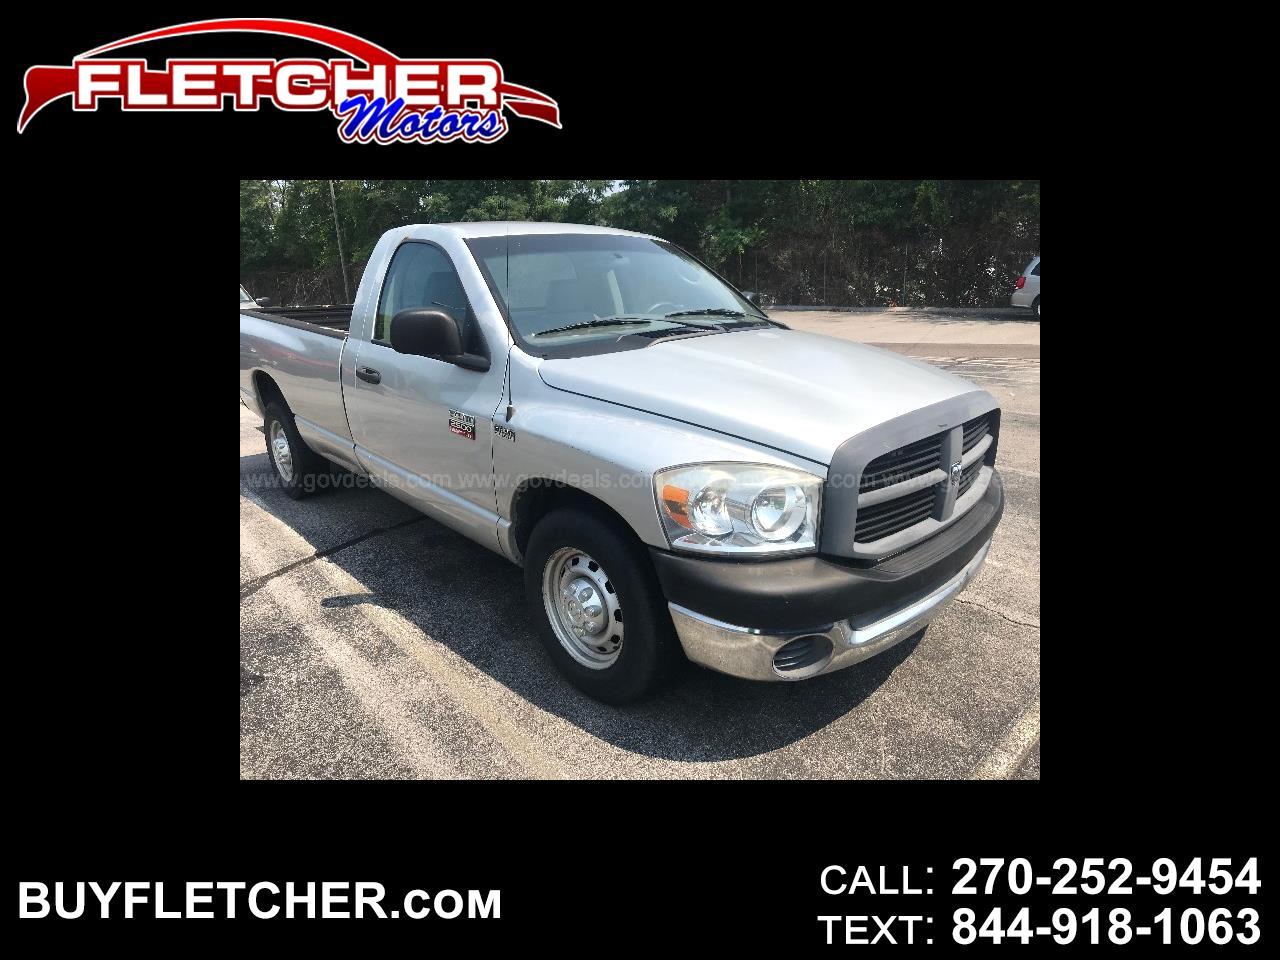 Used 2007 Dodge Ram 2500 2WD Reg Cab 140.5" ST for Sale in Benton KY